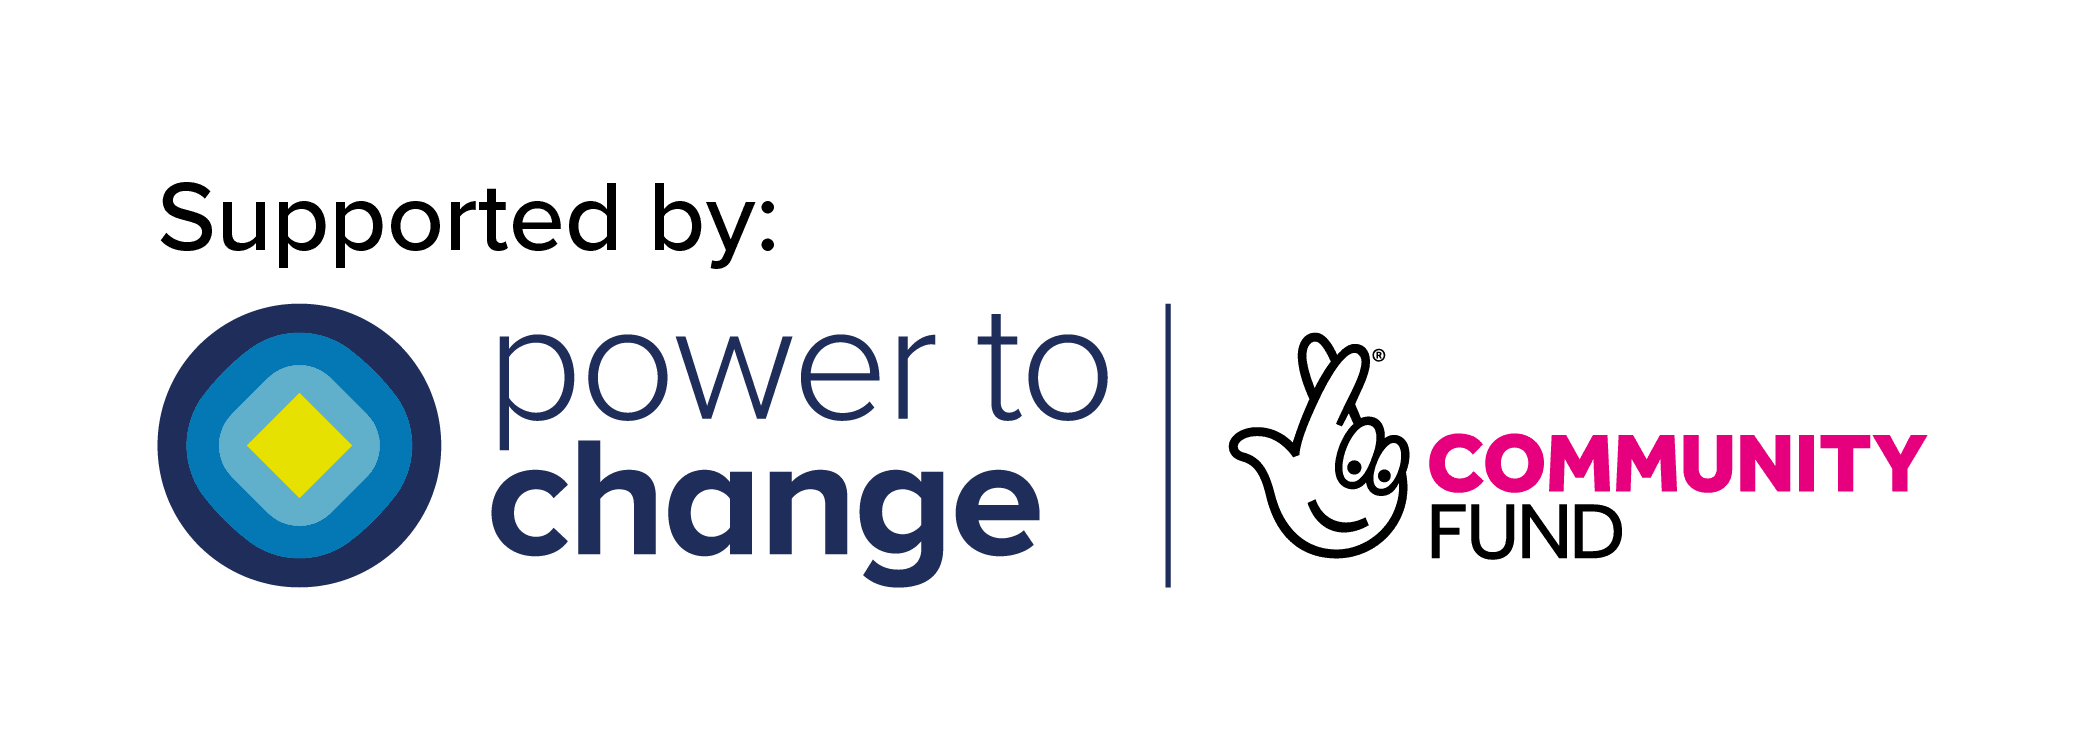 Supported by: Power to Change and National Lottery Community Fund logos